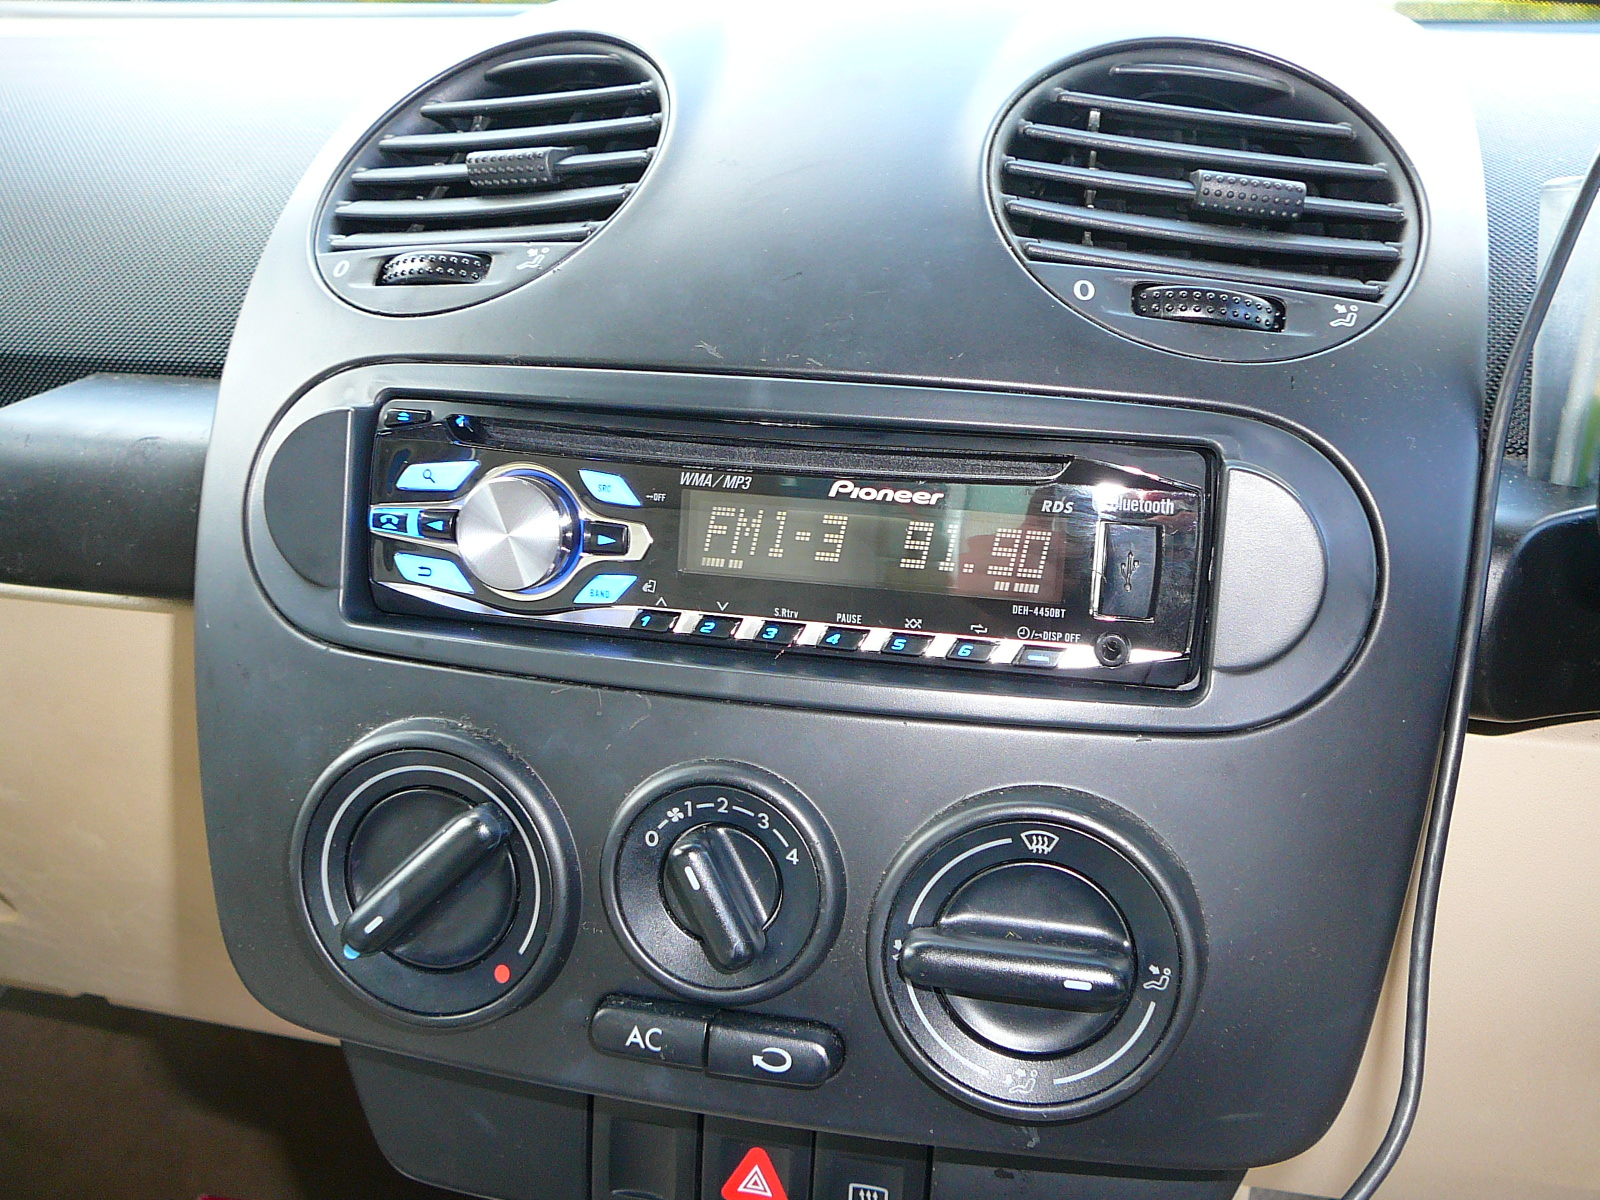 VW Beetle, Replacement head unit with dash trim